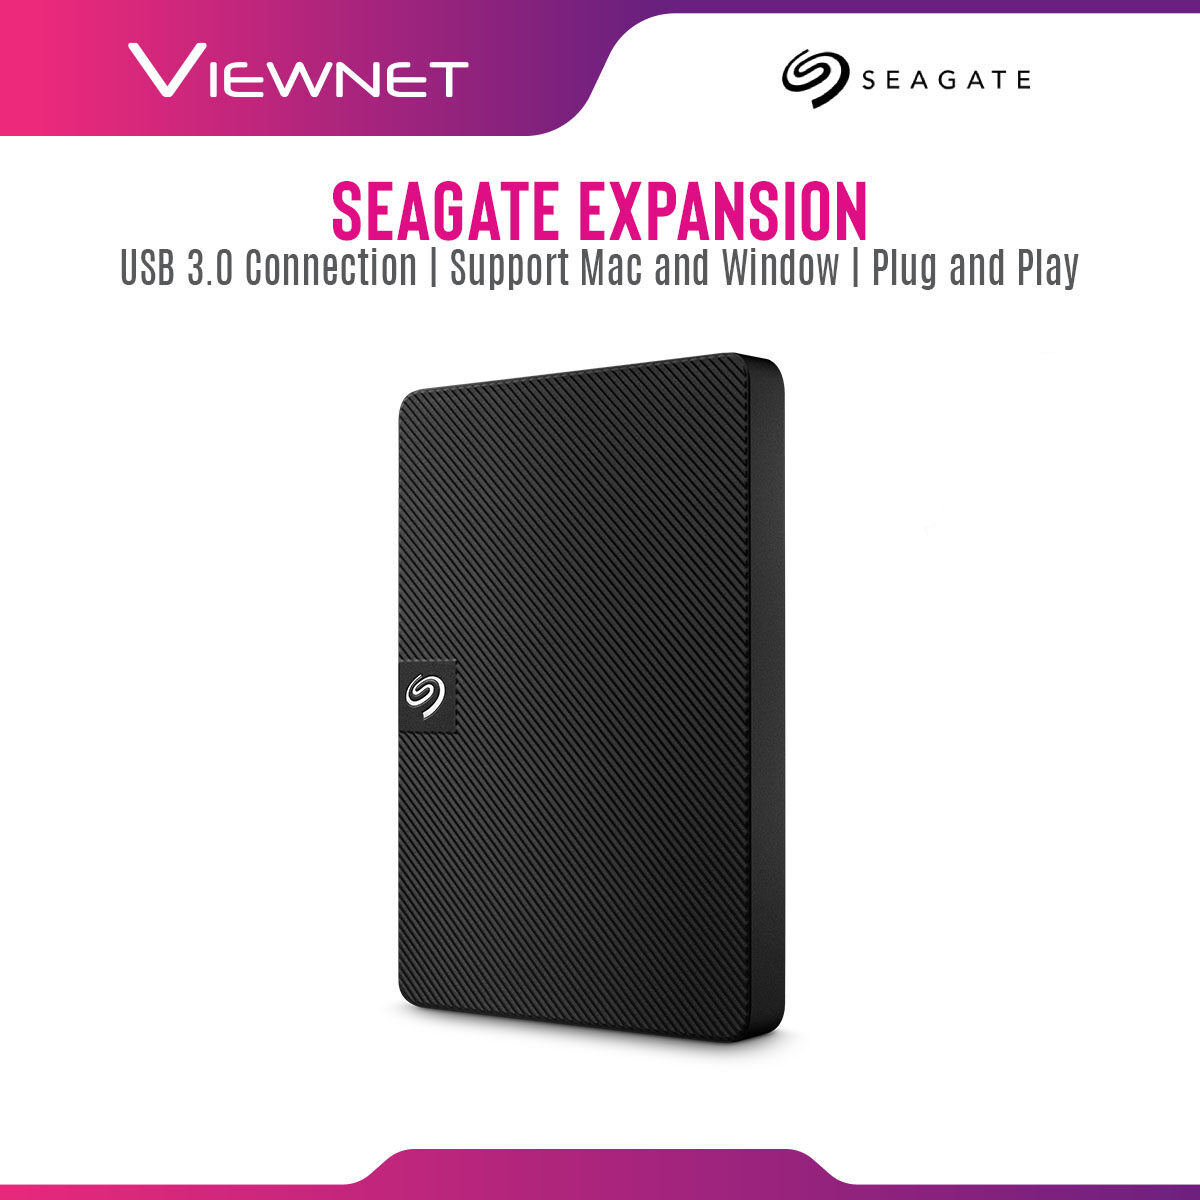 Seagate Expansion 2TB  USB 3.0 Portable External Hard Drive with Drag-and-Drop File Saving Windows Compatibility External Hard Disk